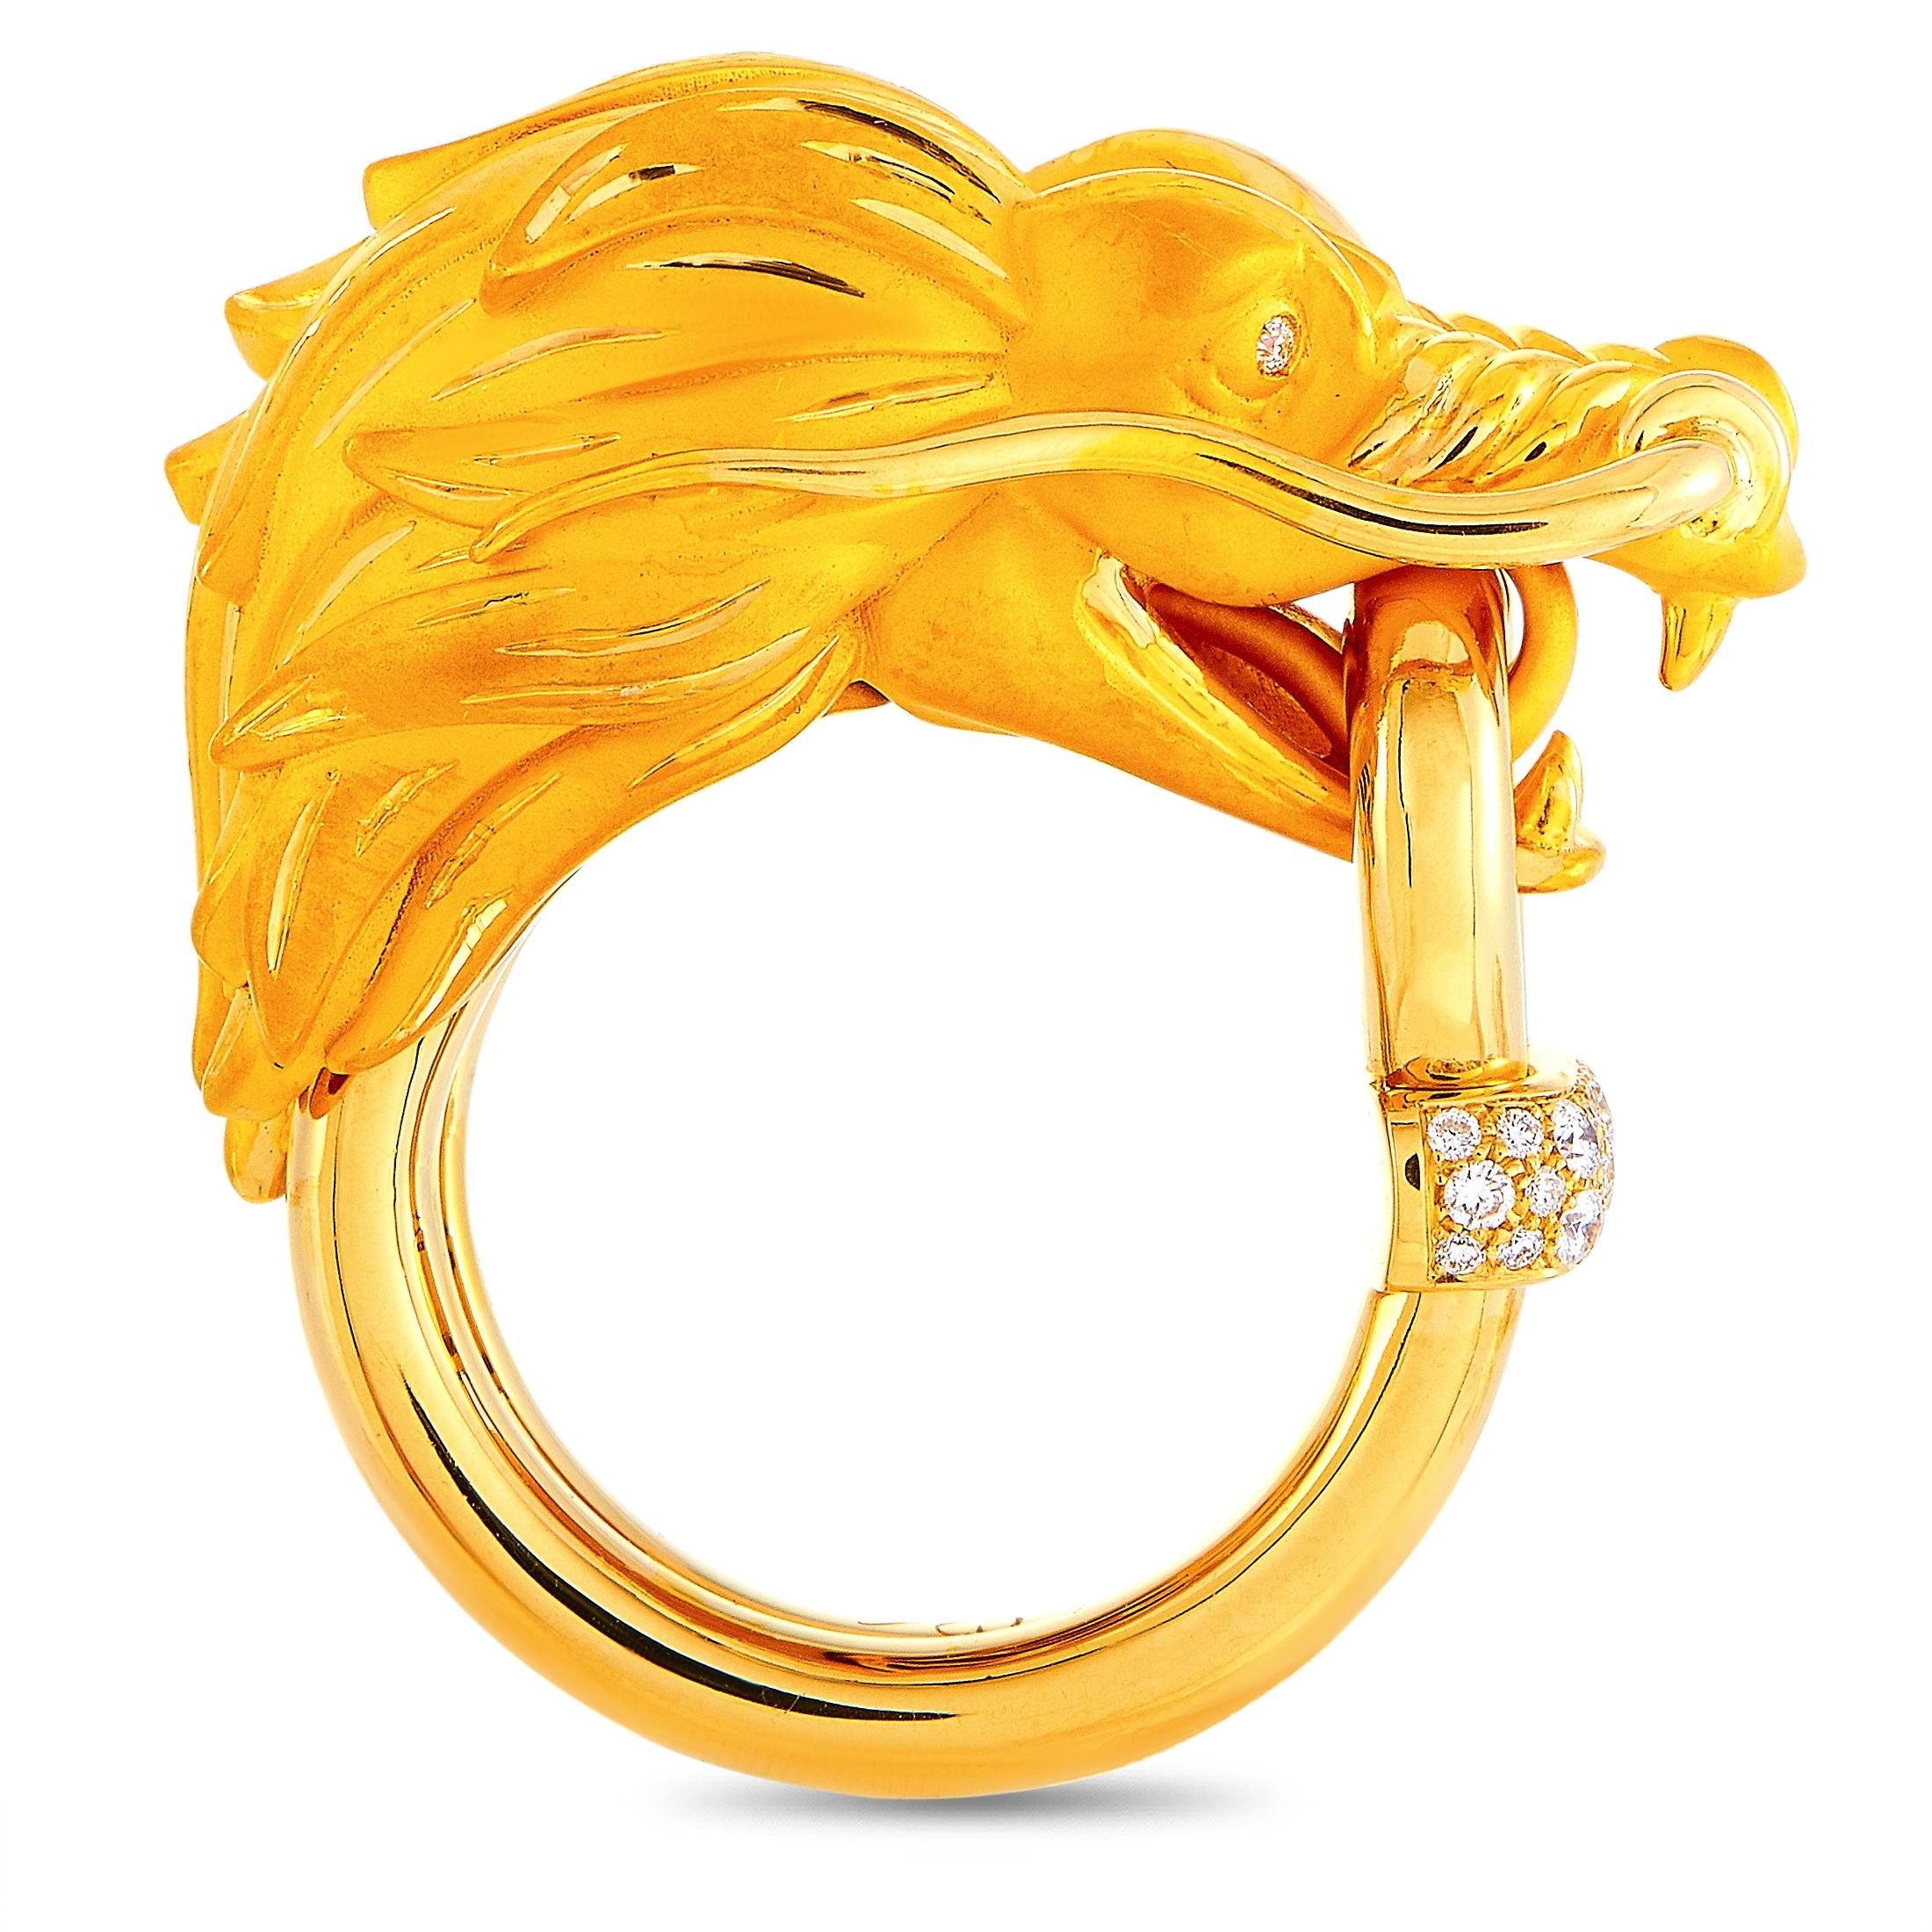 The Carrera y Carrera “Dragon's Secret XL” ring is made of 18K yellow gold and embellished with diamonds that amount to 0.18 carats. The ring weighs 18.2 grams and boasts band thickness of 5 mm and top height of 10 mm, while top dimensions measure